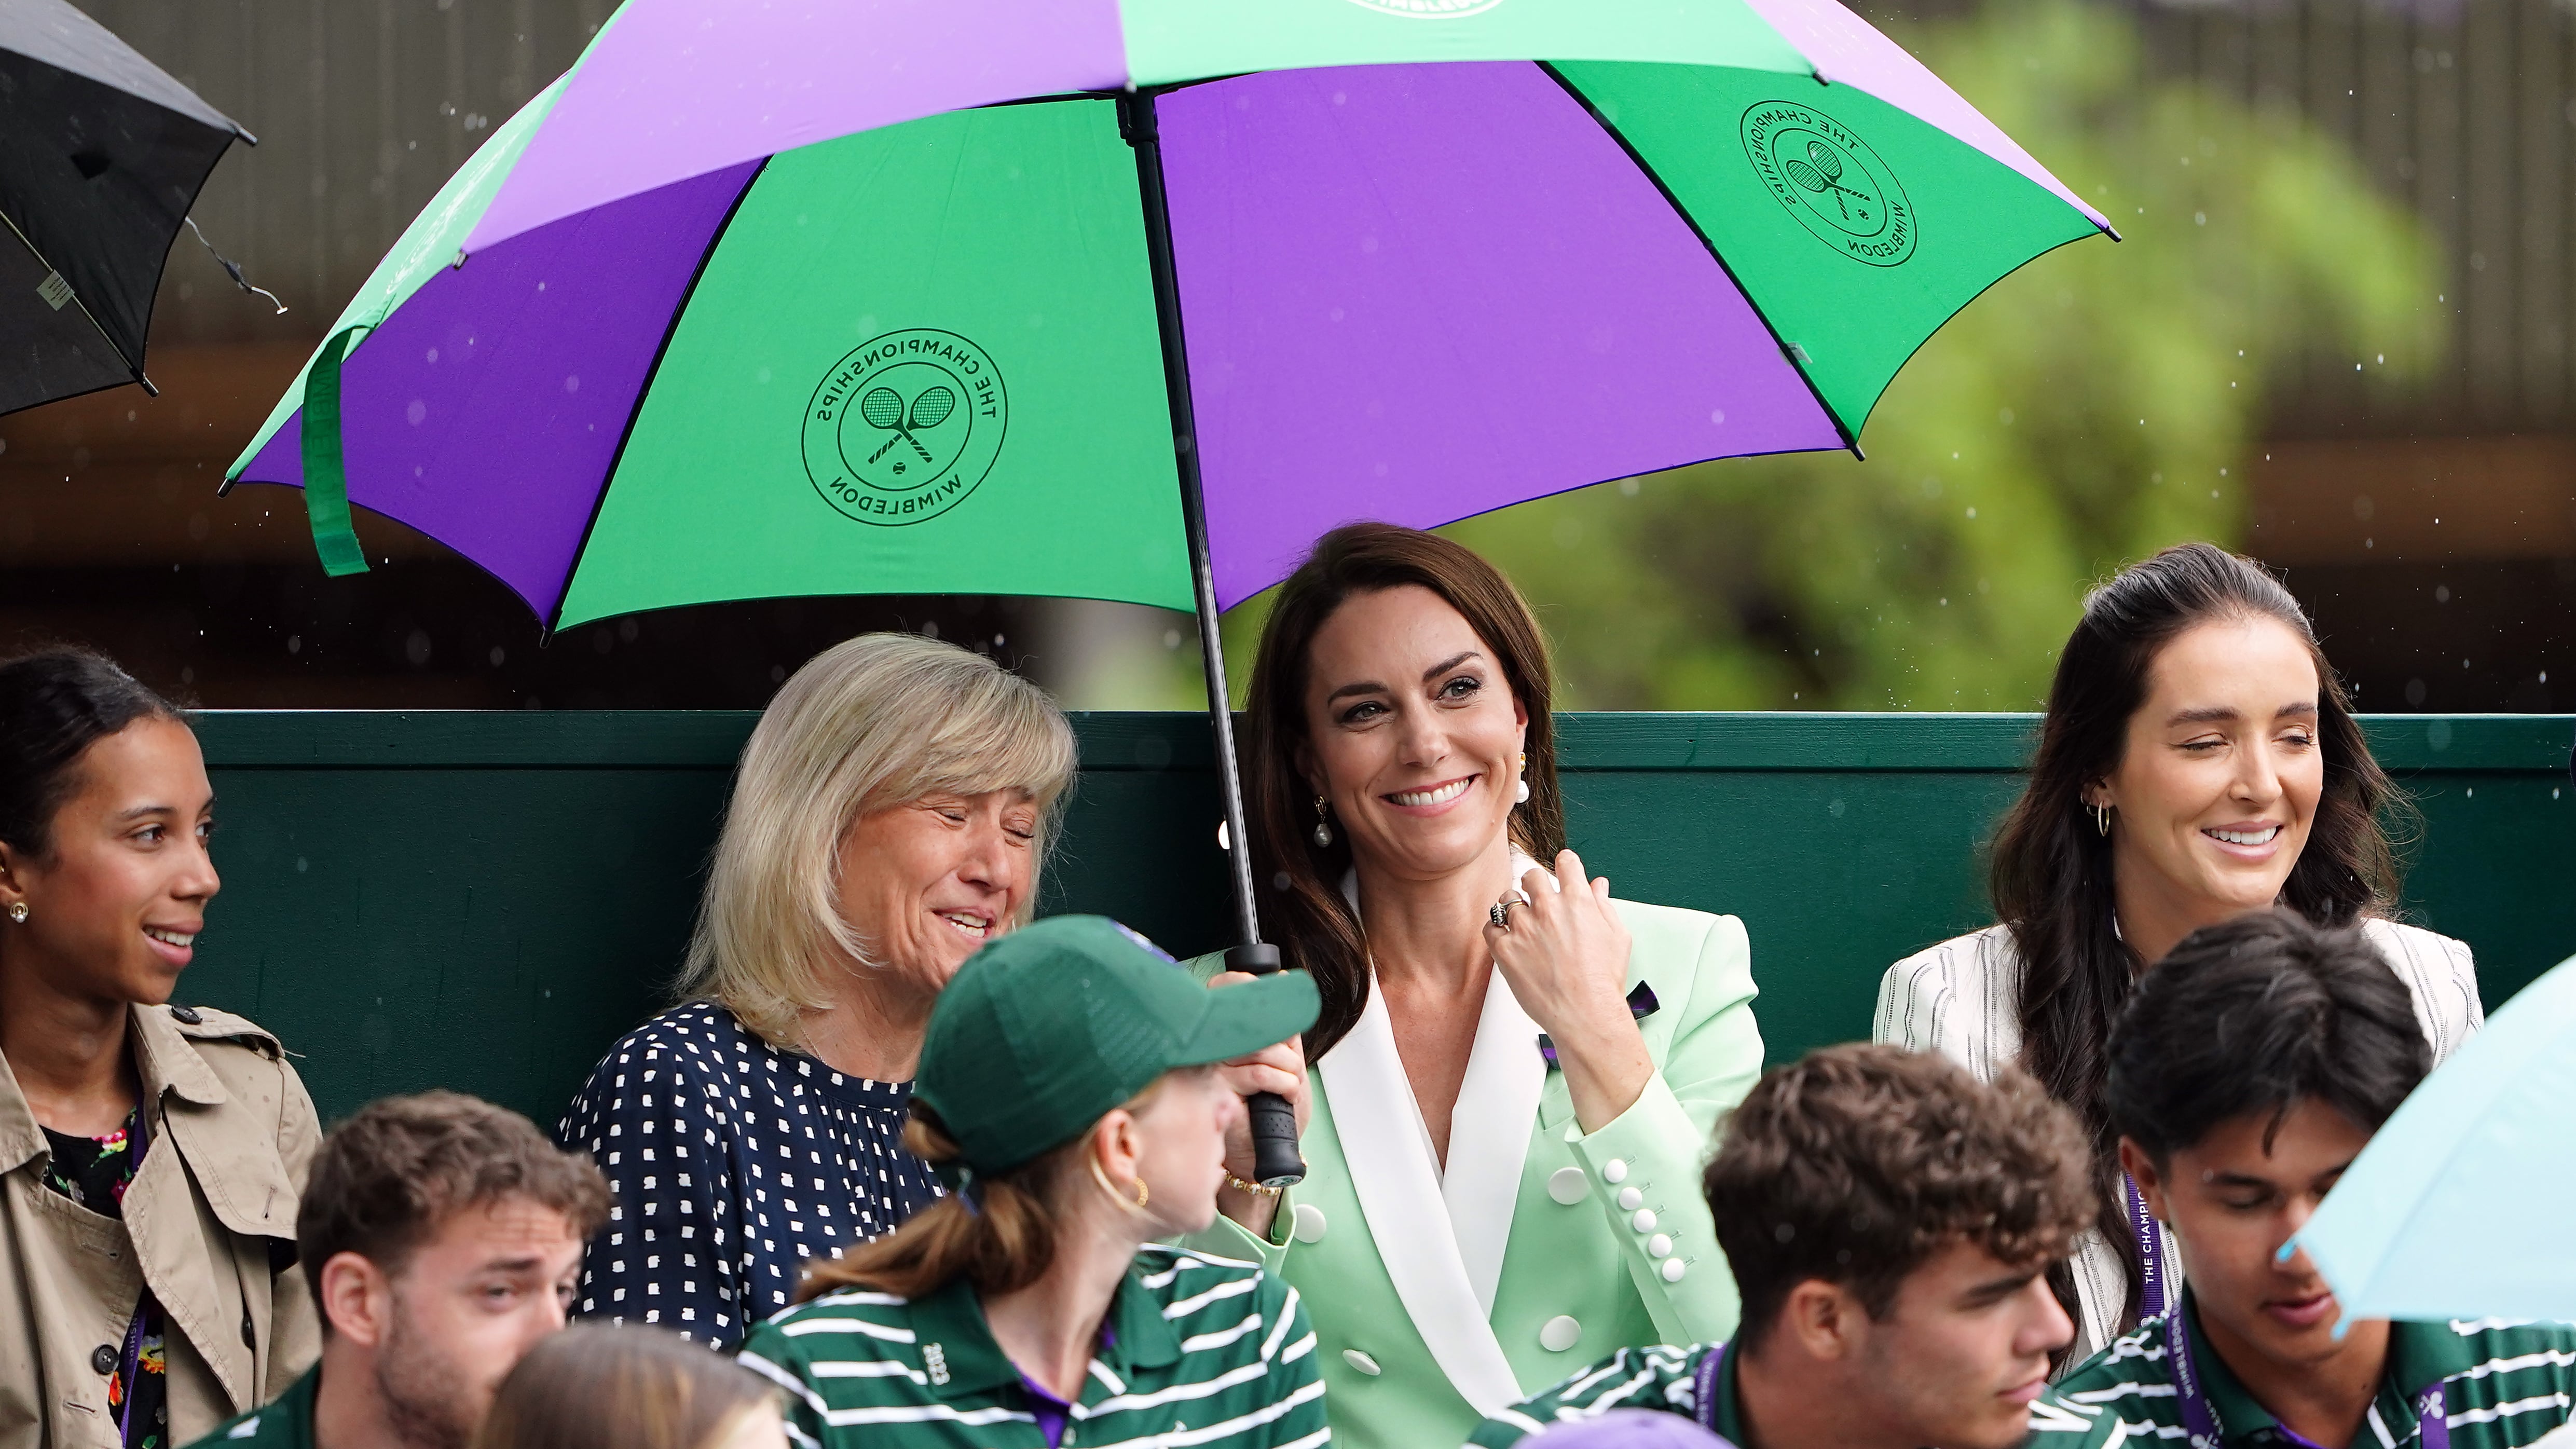 A large umbrella is an essential for every attendee – even the Princess of Wales